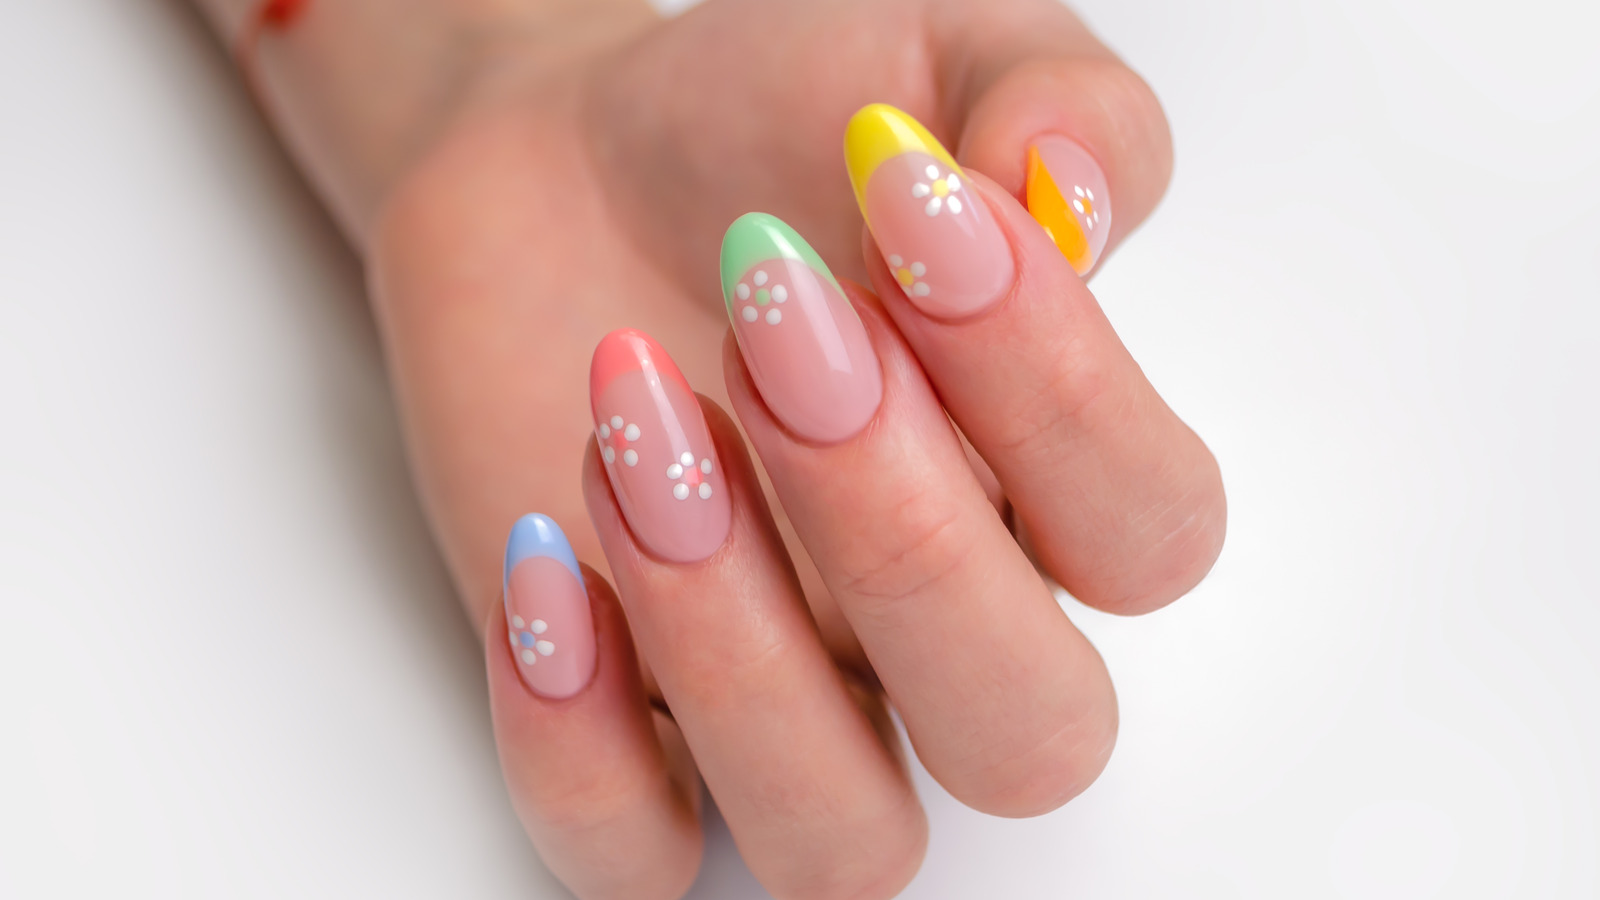 3. Floral Nail Designs with Daisy - wide 6